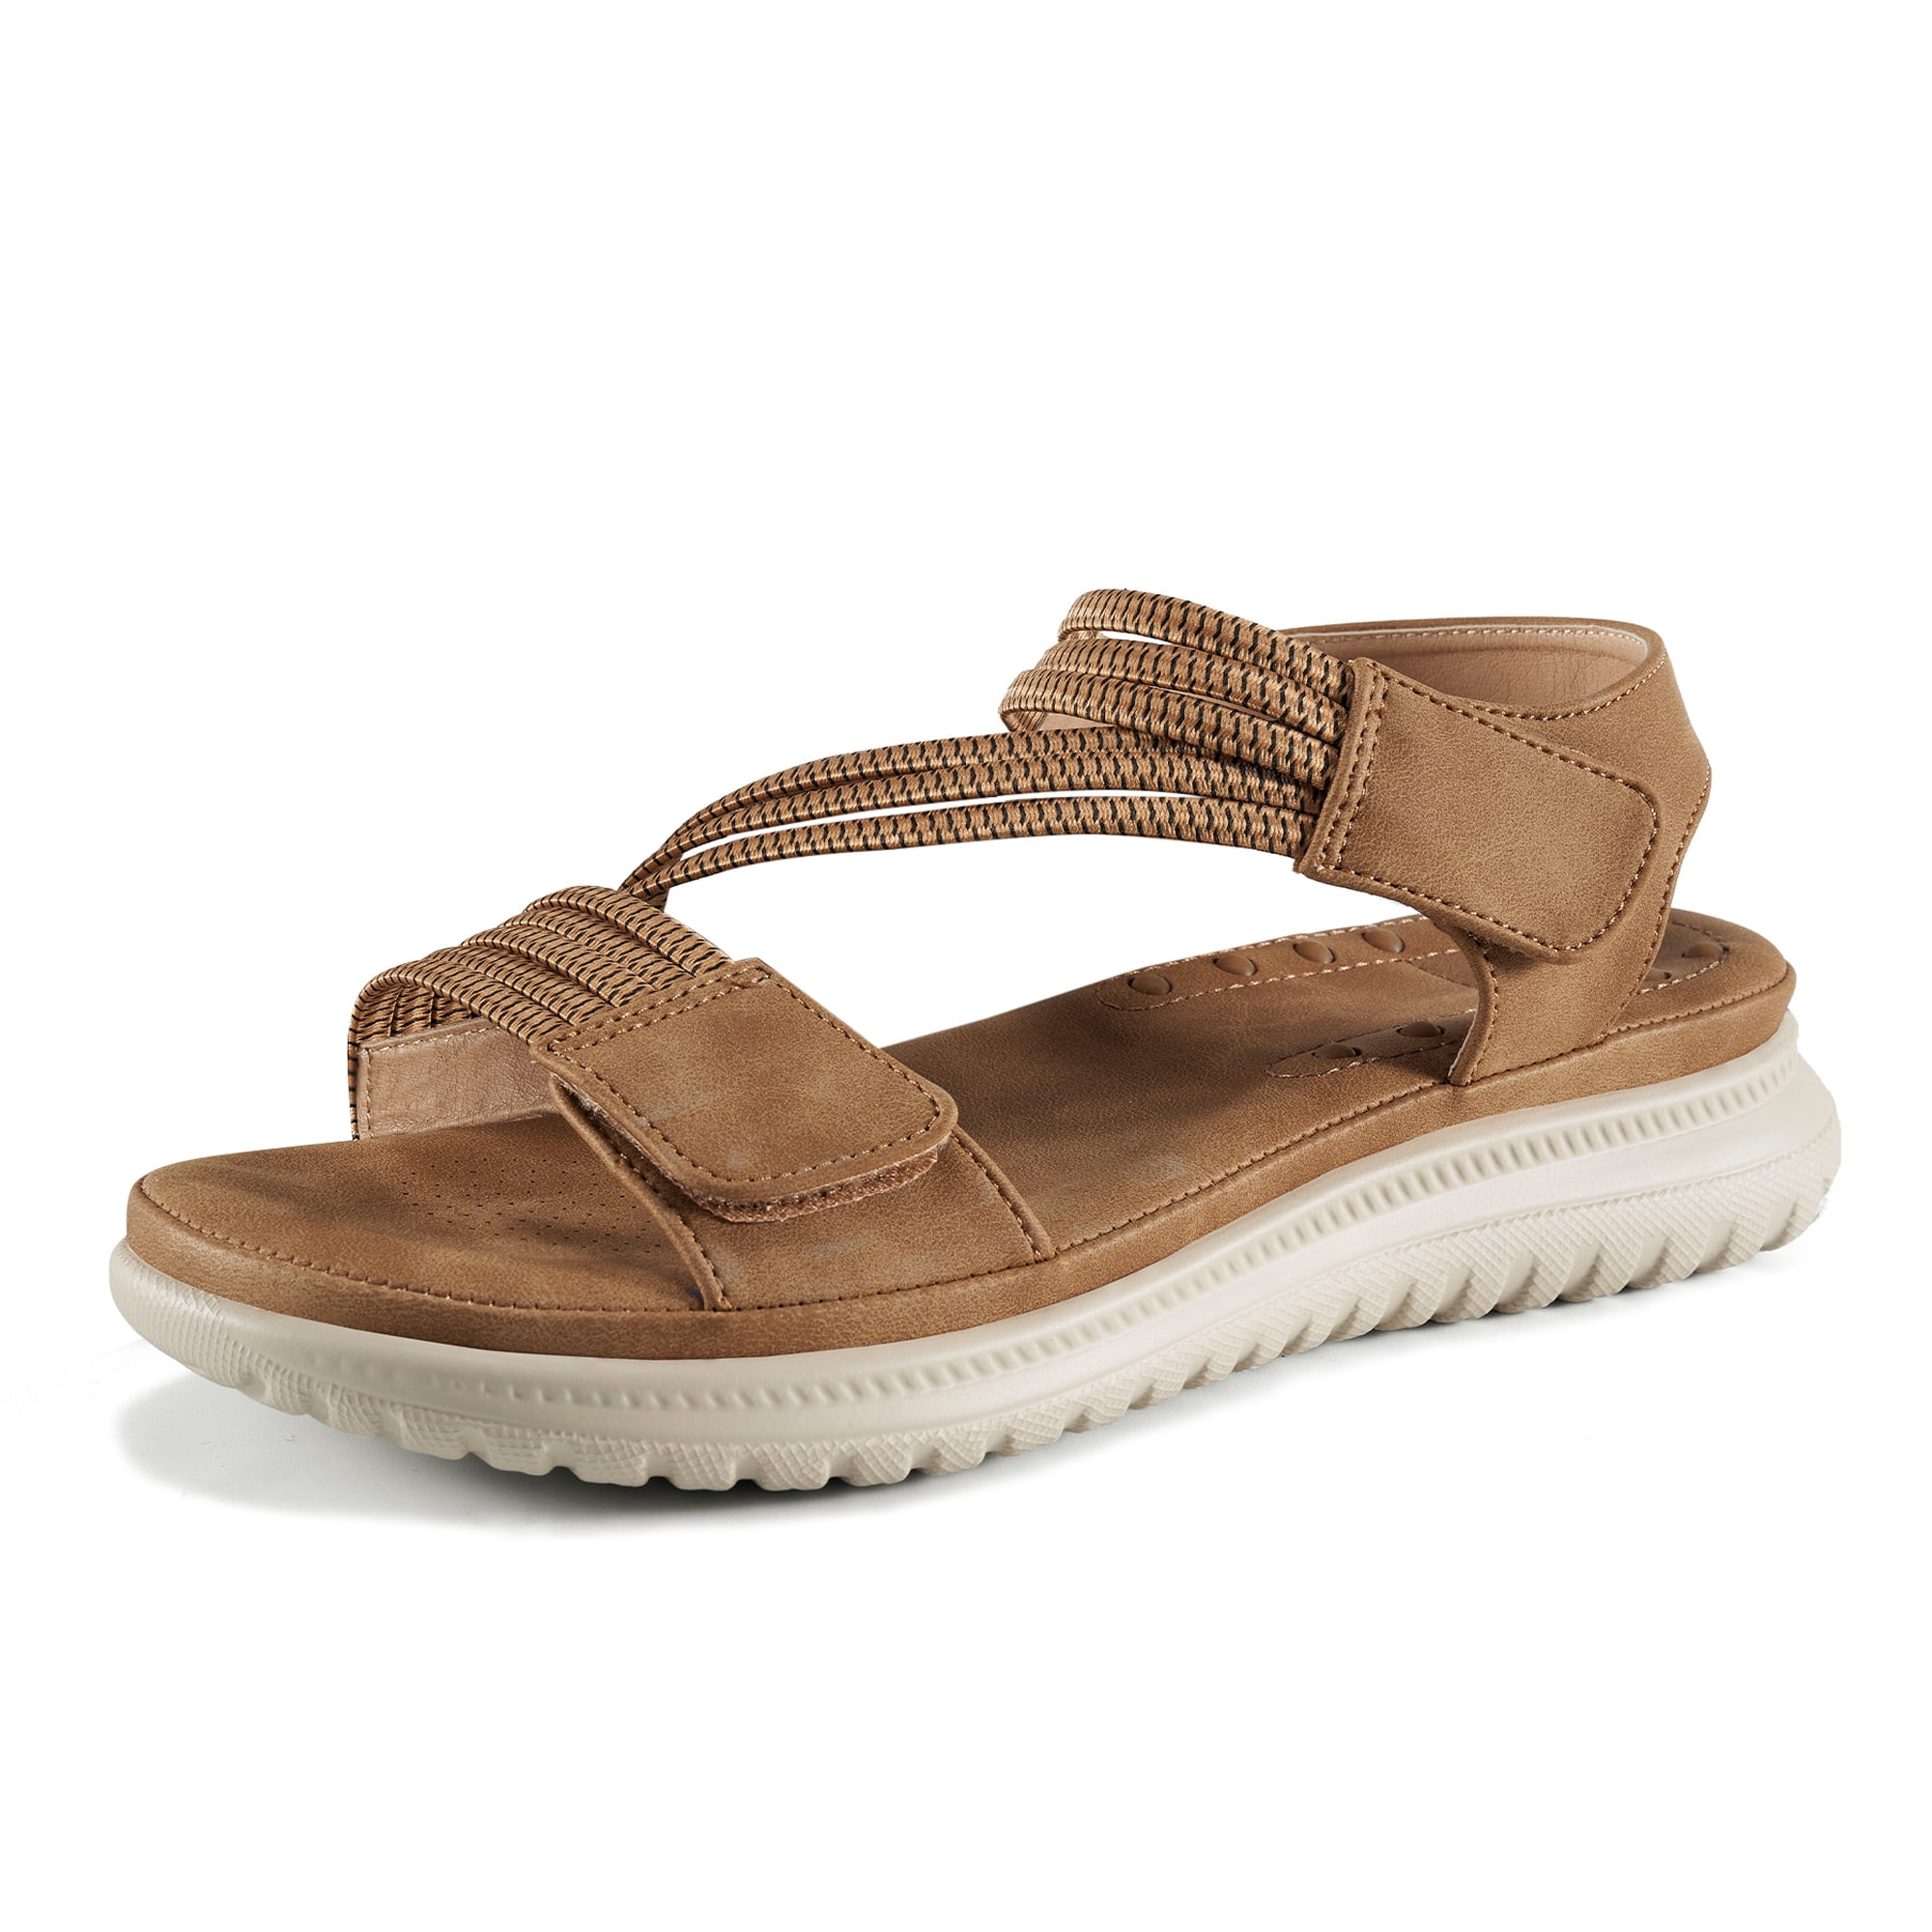 Wedge Sandals for Summer Comfortable Walking Sport Sandals with Arch Support Lightweight Athletic Shoes - Walmart.com